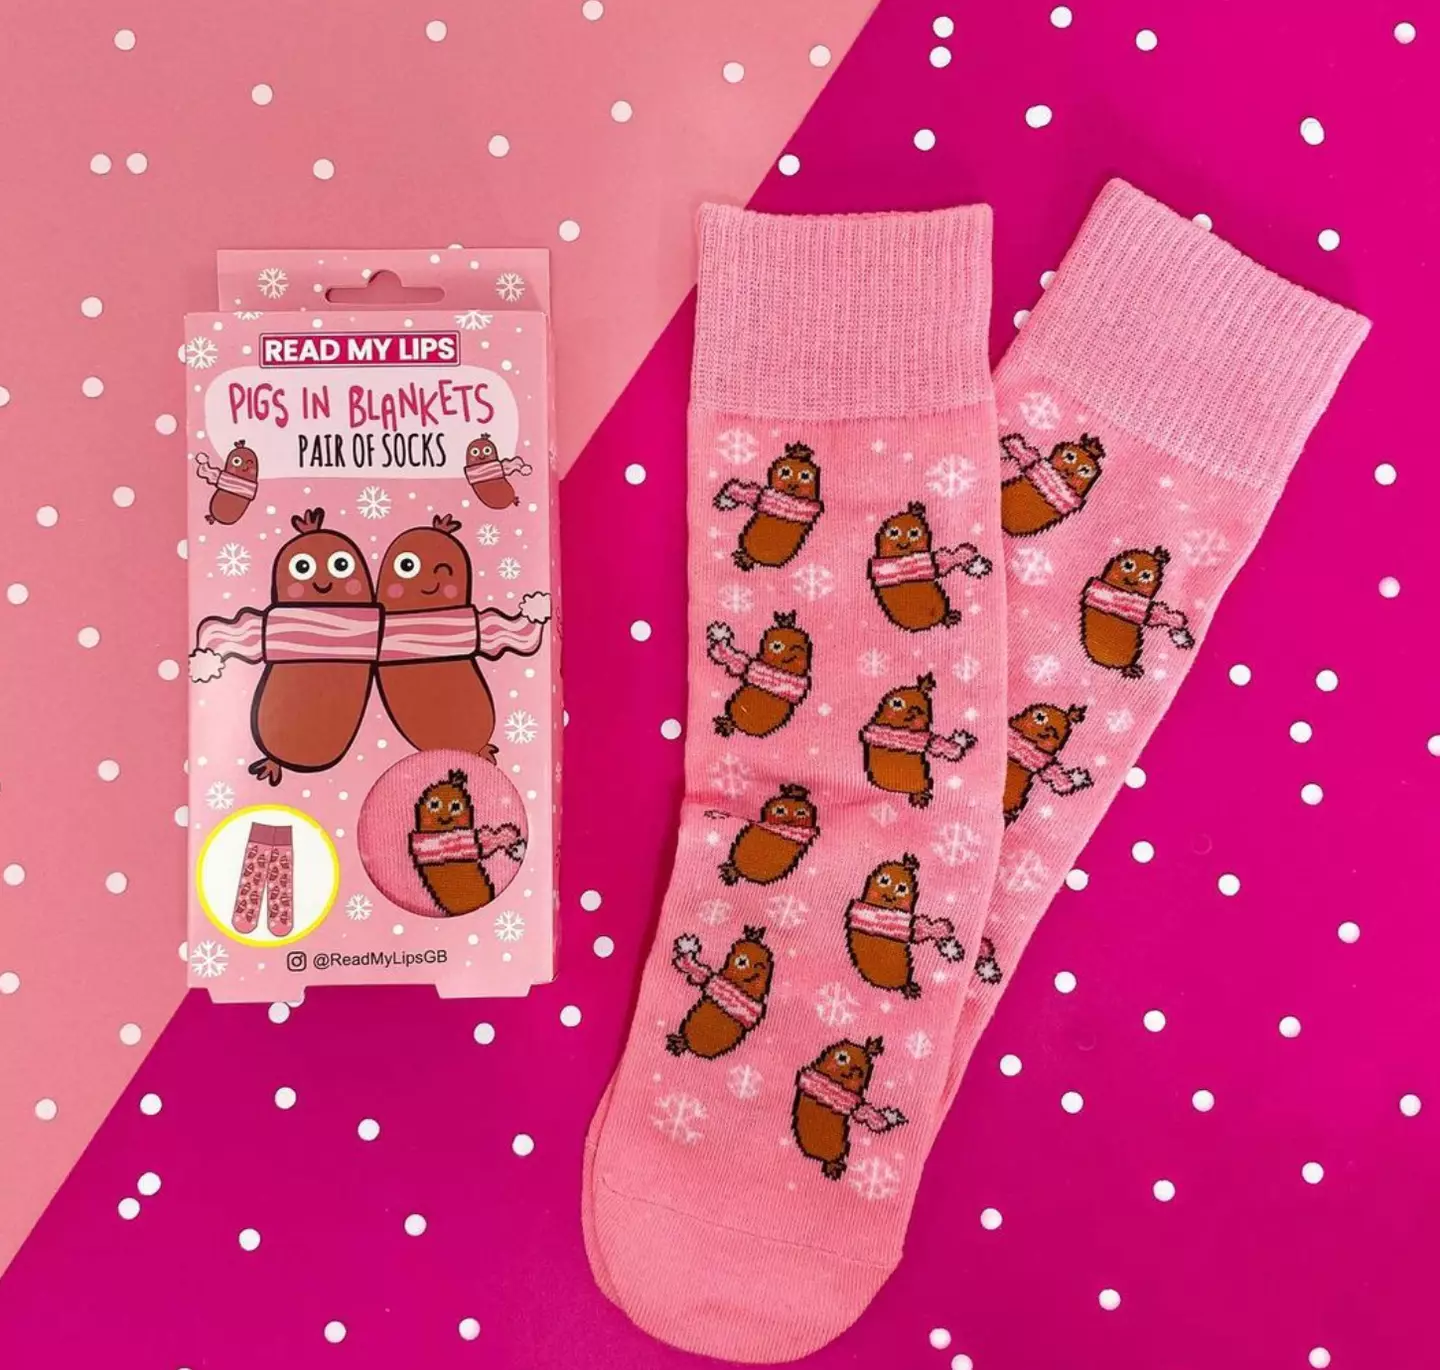 If masks aren't your thing, there's piggie socks too! (